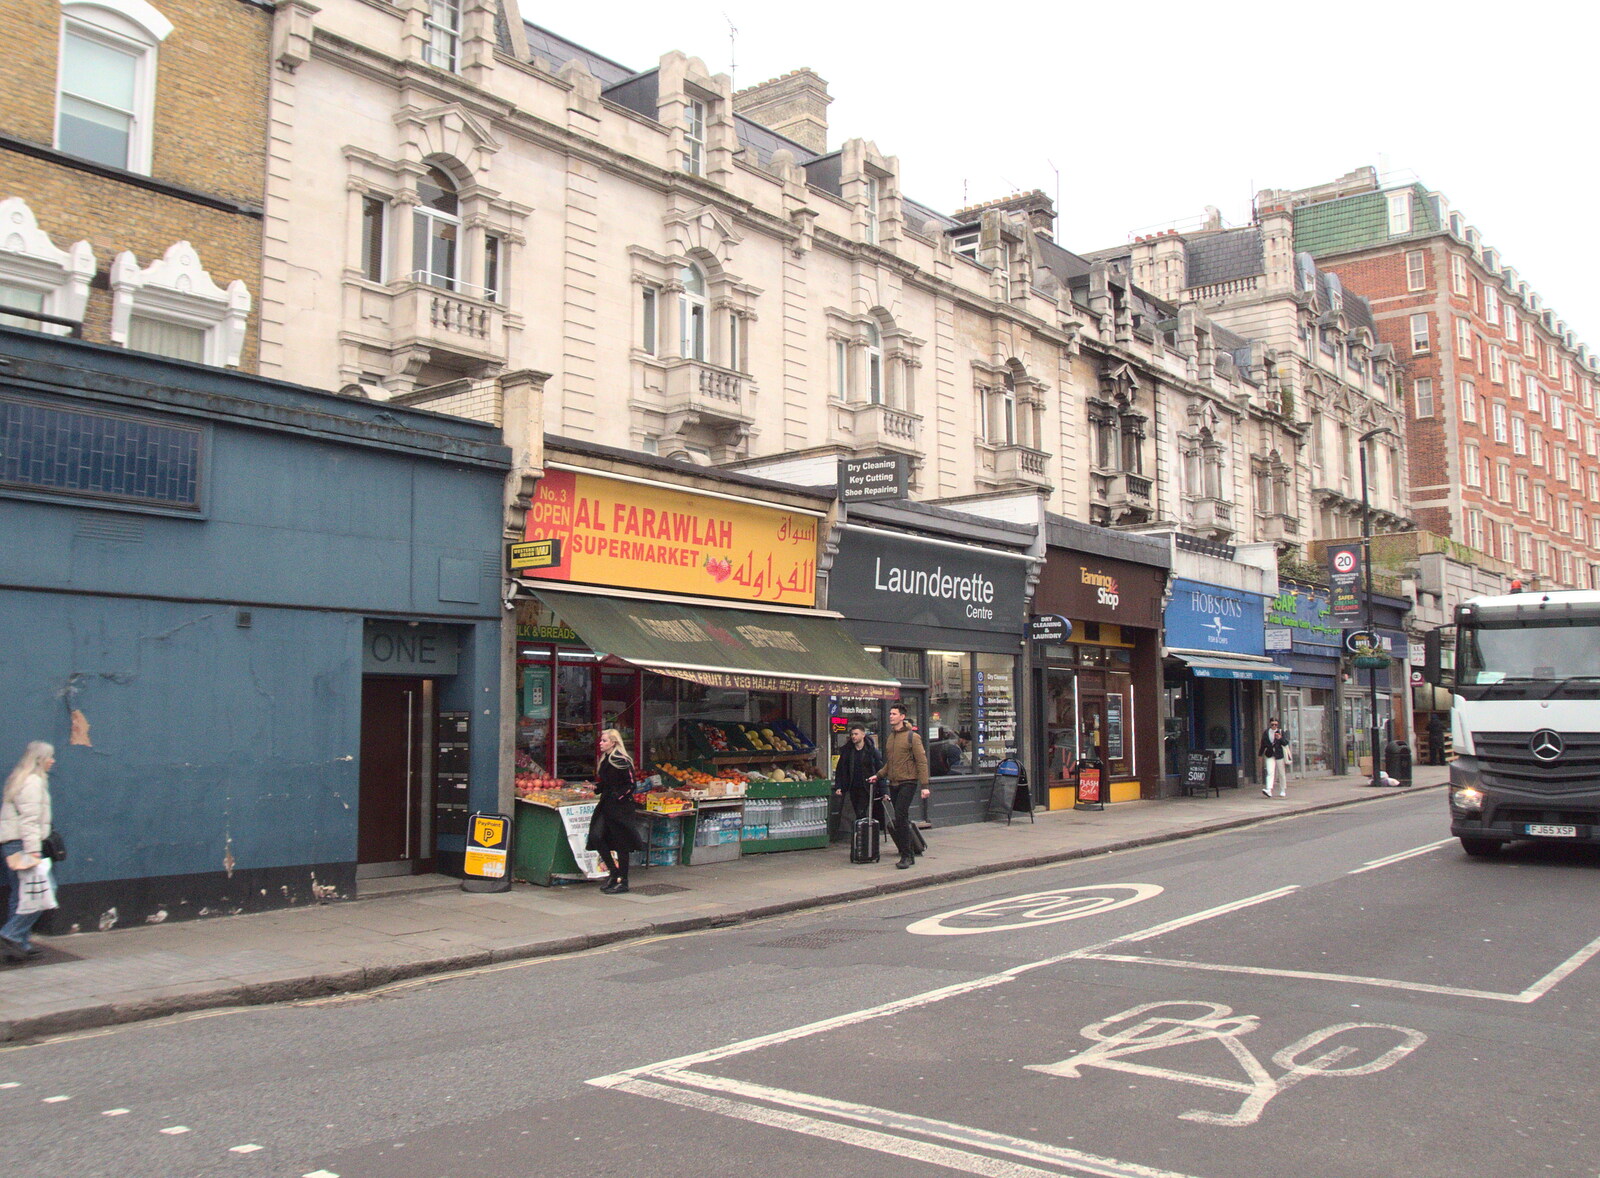 Porchester Road in Bayswater from The Last Trip to the SwiftKey Office, Paddington, London - 23rd February 2022